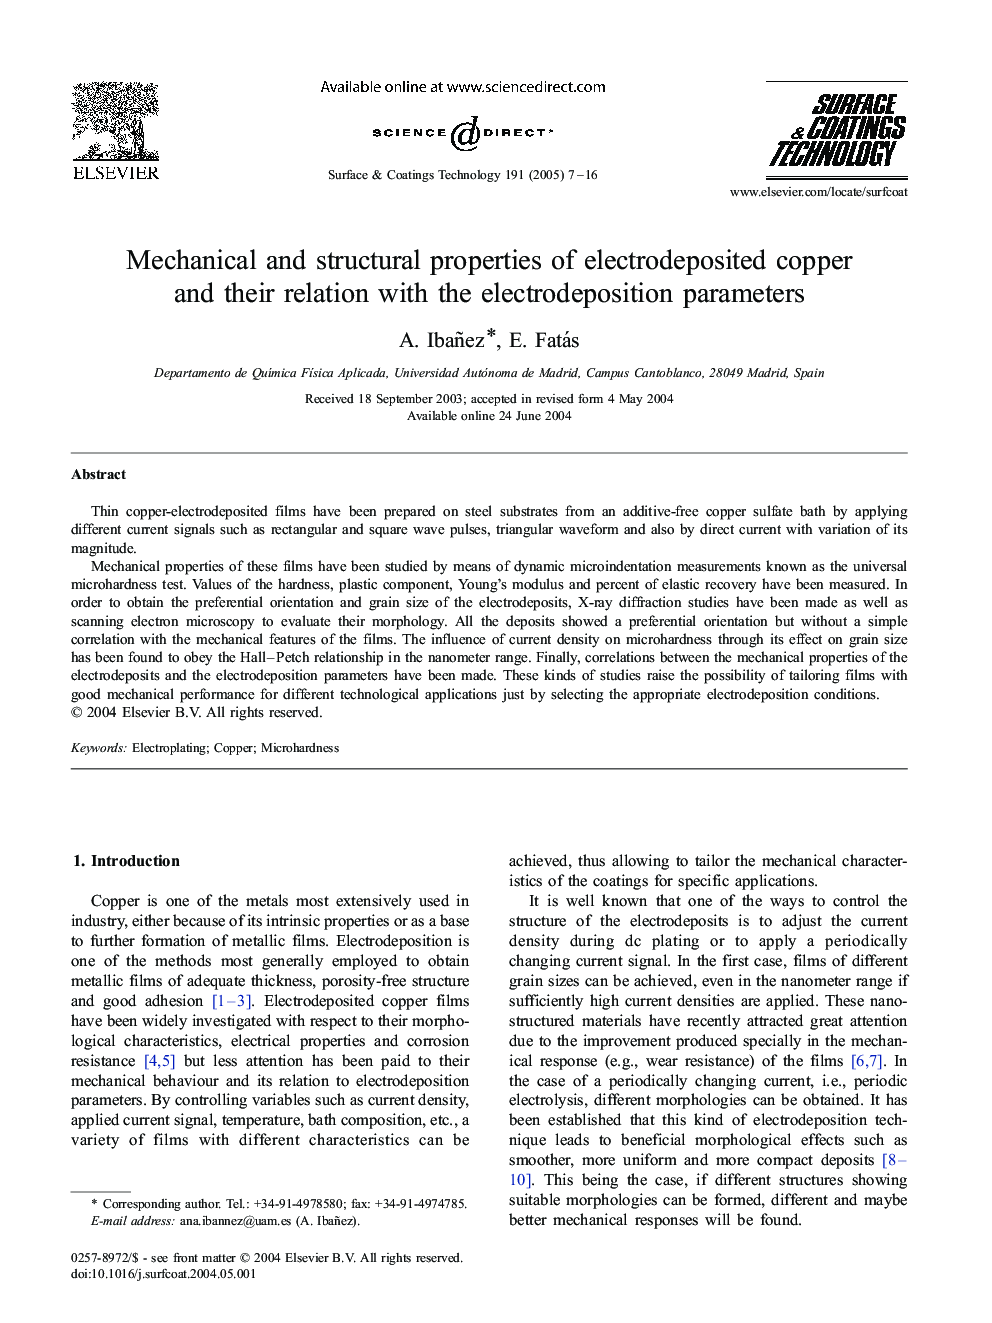 Mechanical and structural properties of electrodeposited copper and their relation with the electrodeposition parameters